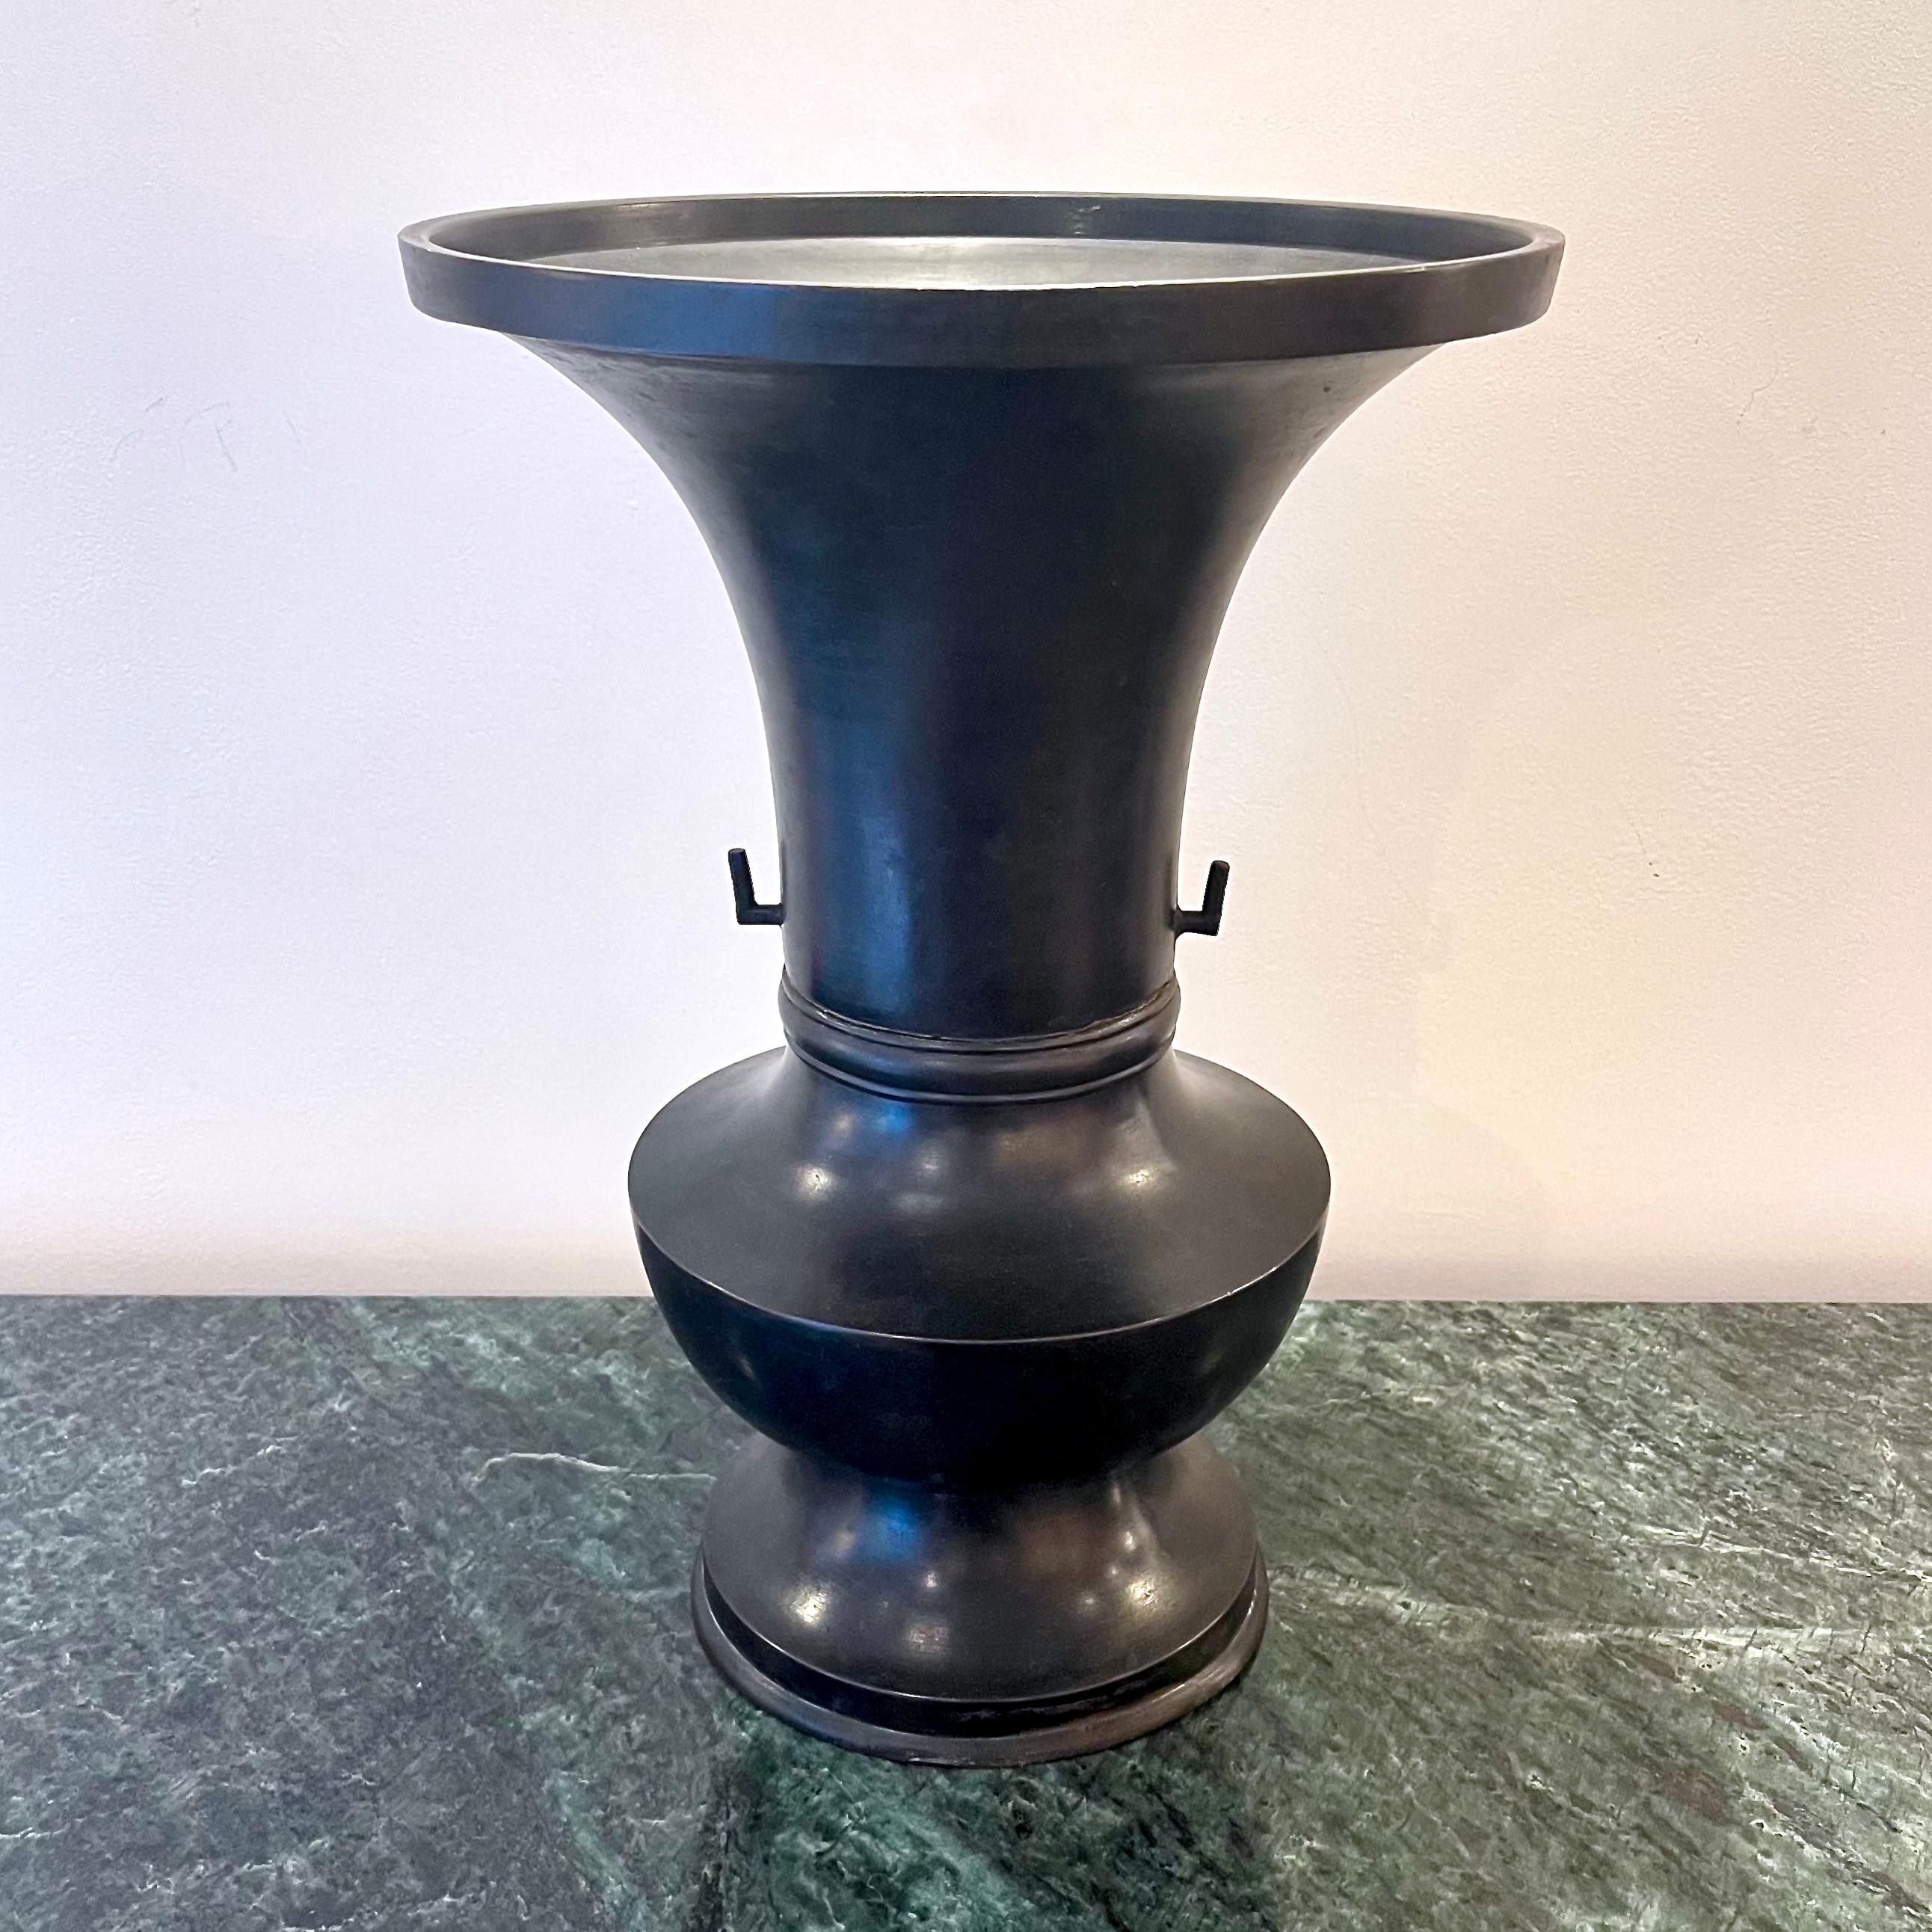 Meiji  bronze vase, of striking simple form dating from the mid 19th century. Finely cast with beautiful dark patina.